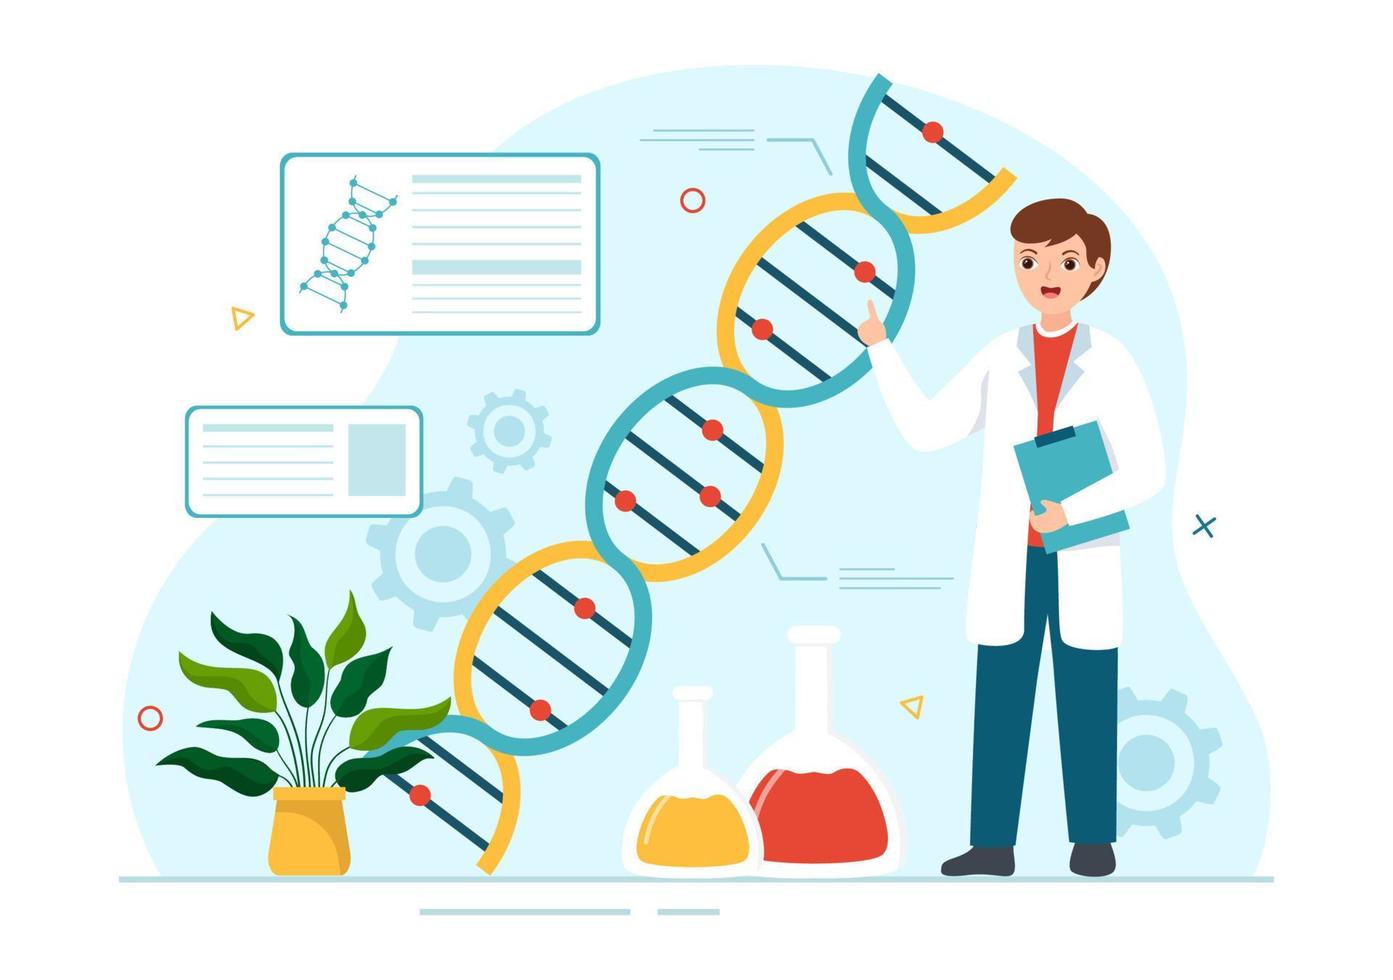 Genetic Engineering and DNA Modifications Illustration with Genetics Research or Experiment Scientists in Flat Cartoon Hand Drawn Templates vector